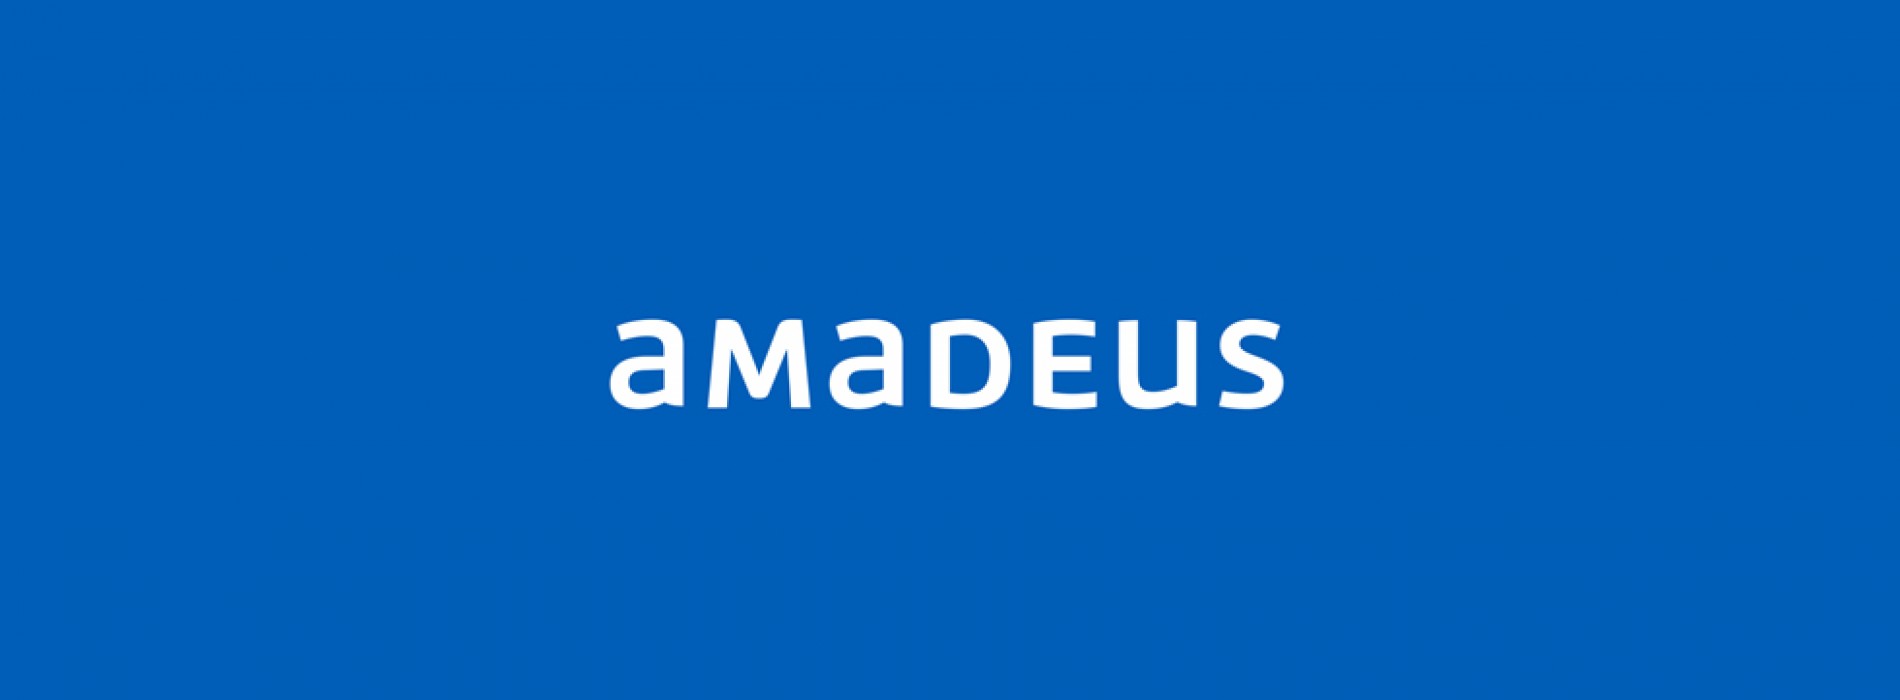 Amadeus encourages industry to make accessible travel a reality for all